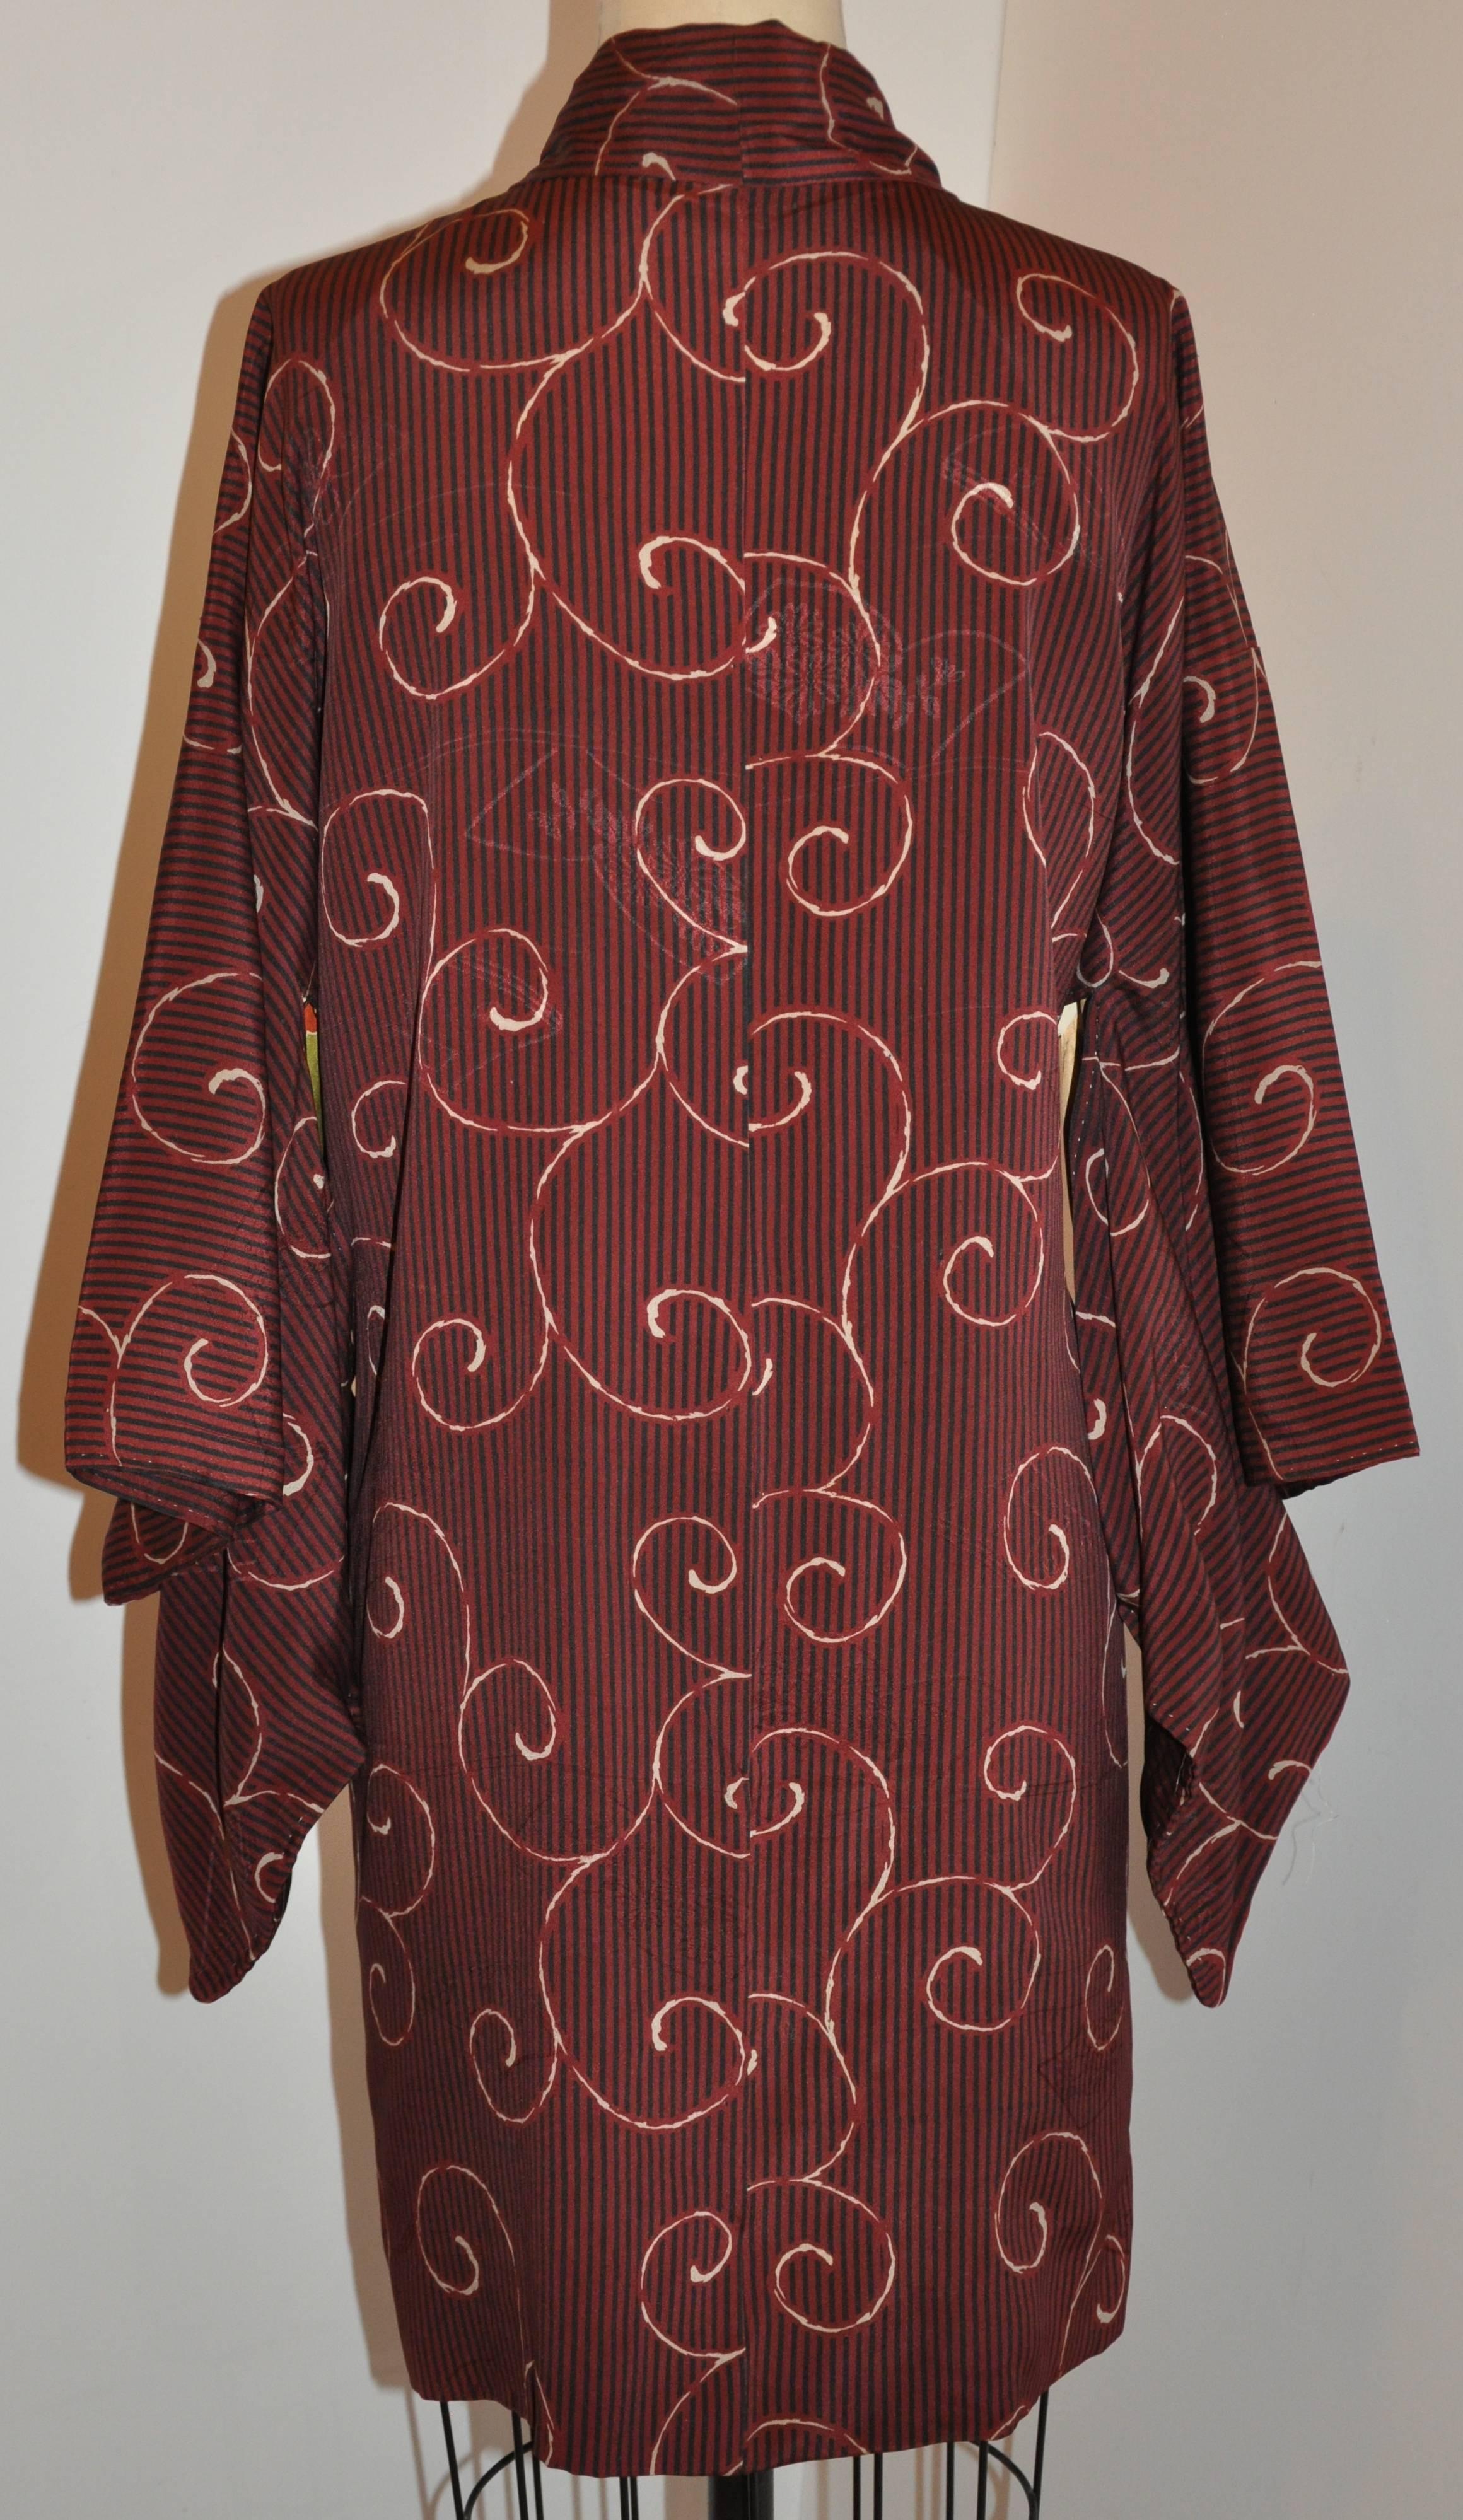           This wonderful Japanese silk kimono is combined with swirls and stripes within the warm burgundy silk. The interior is combined with multi-colors print of clouds as well as the exterior swirls and stripes print.
        The total length